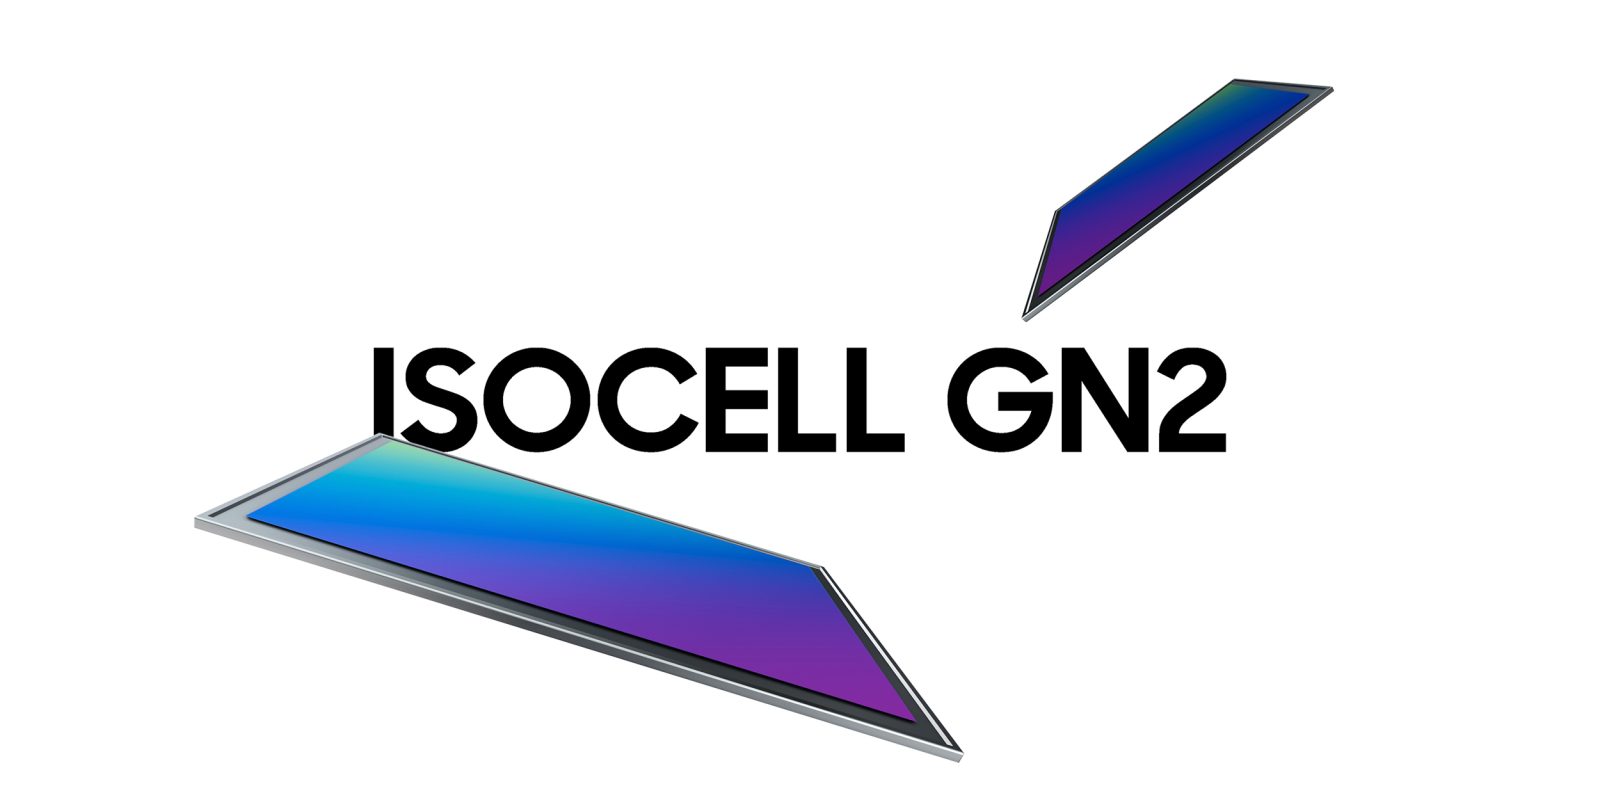 ISOCELL GN2